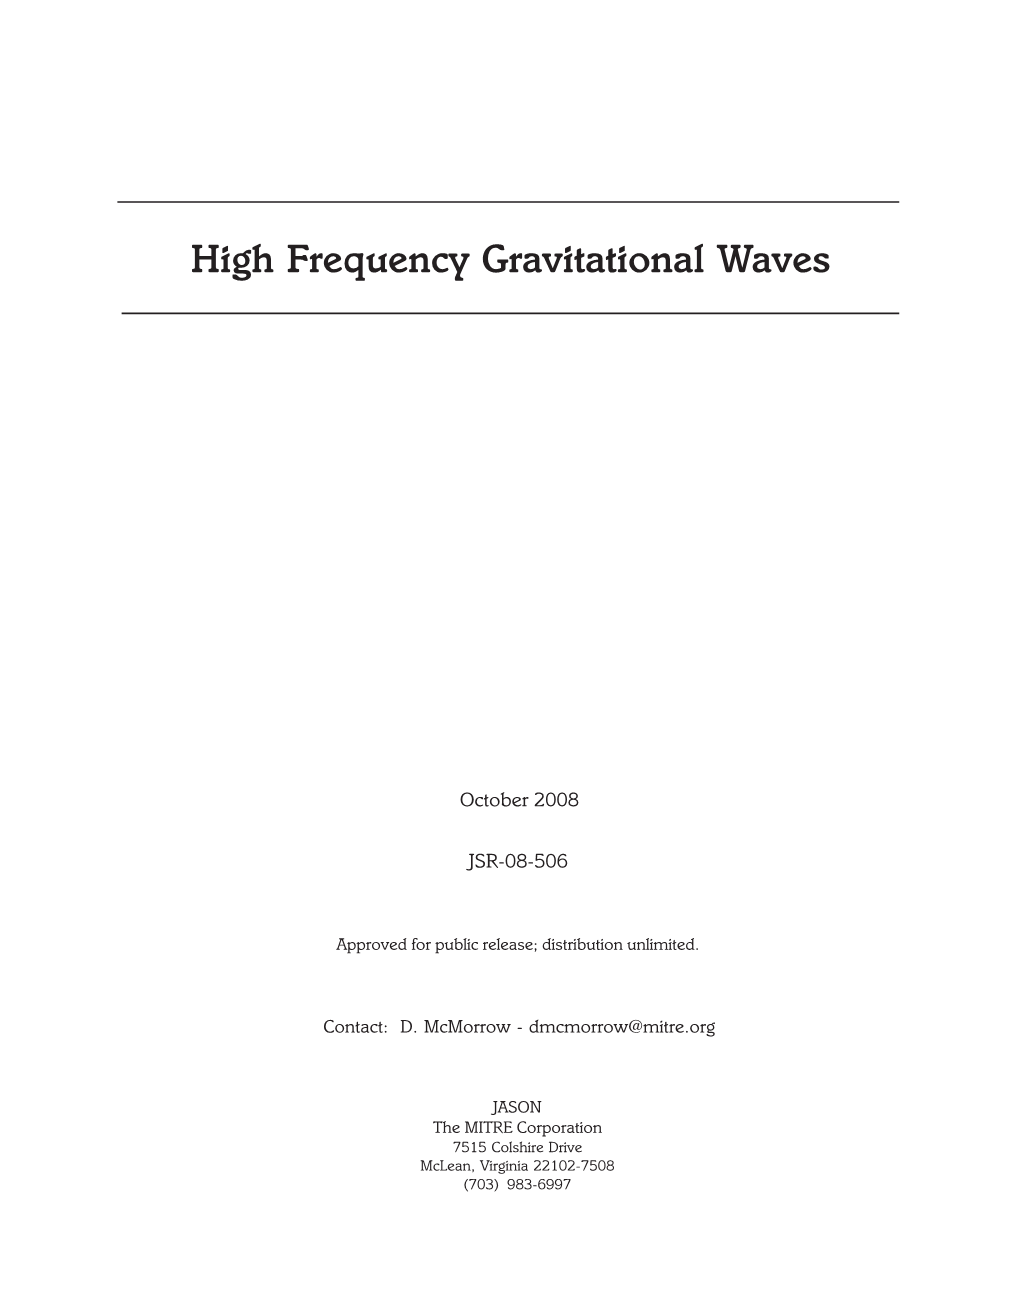 High Frequency Gravitational Waves